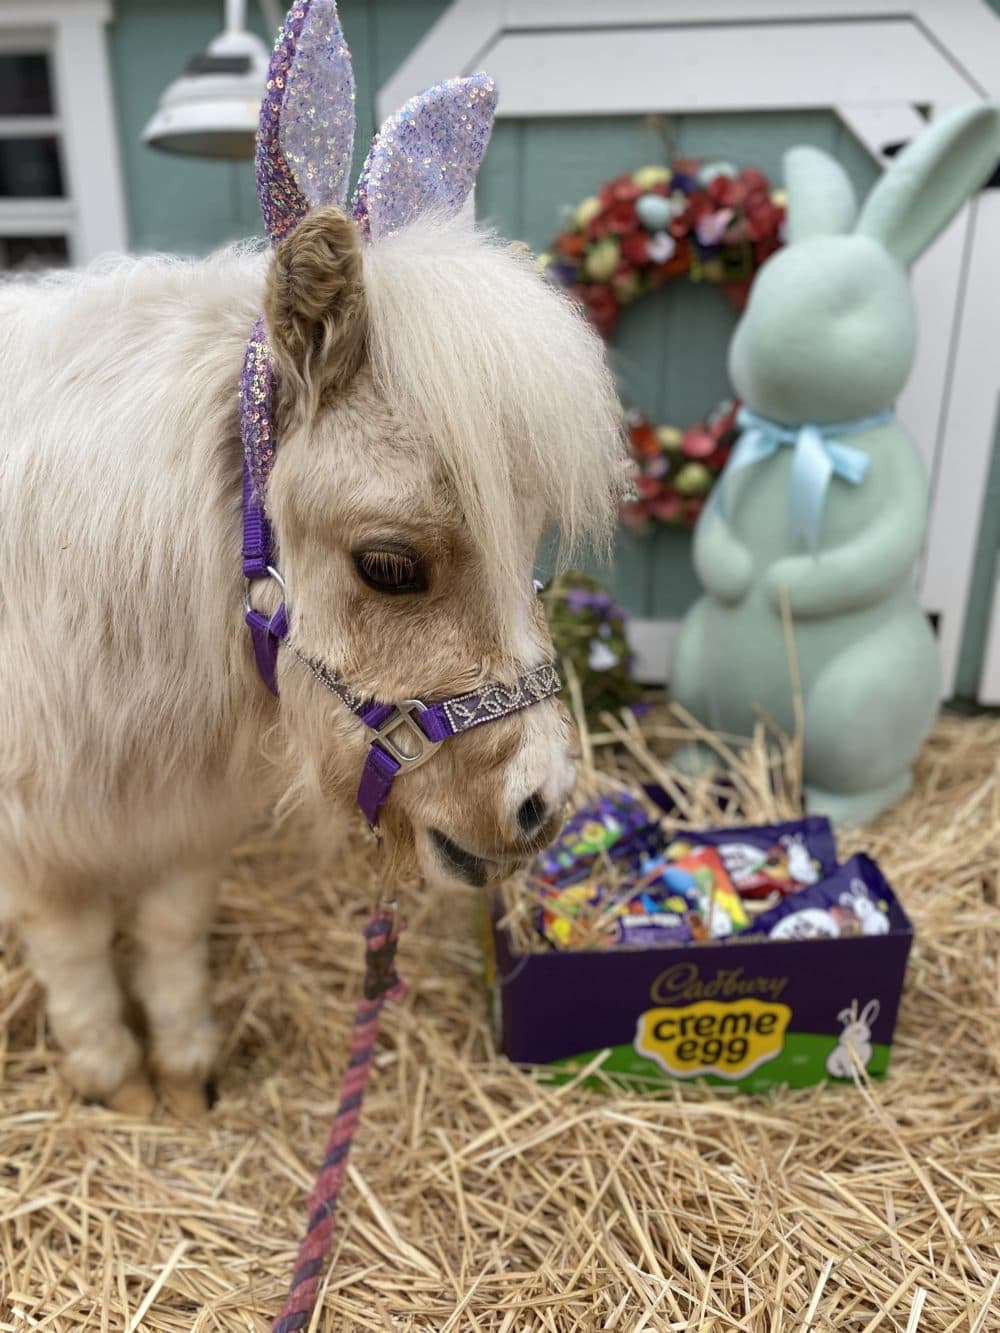 Stewie Vuitton, the mini horse. Photo courtesy of Lifting Spirits Miniature Therapy Horses.